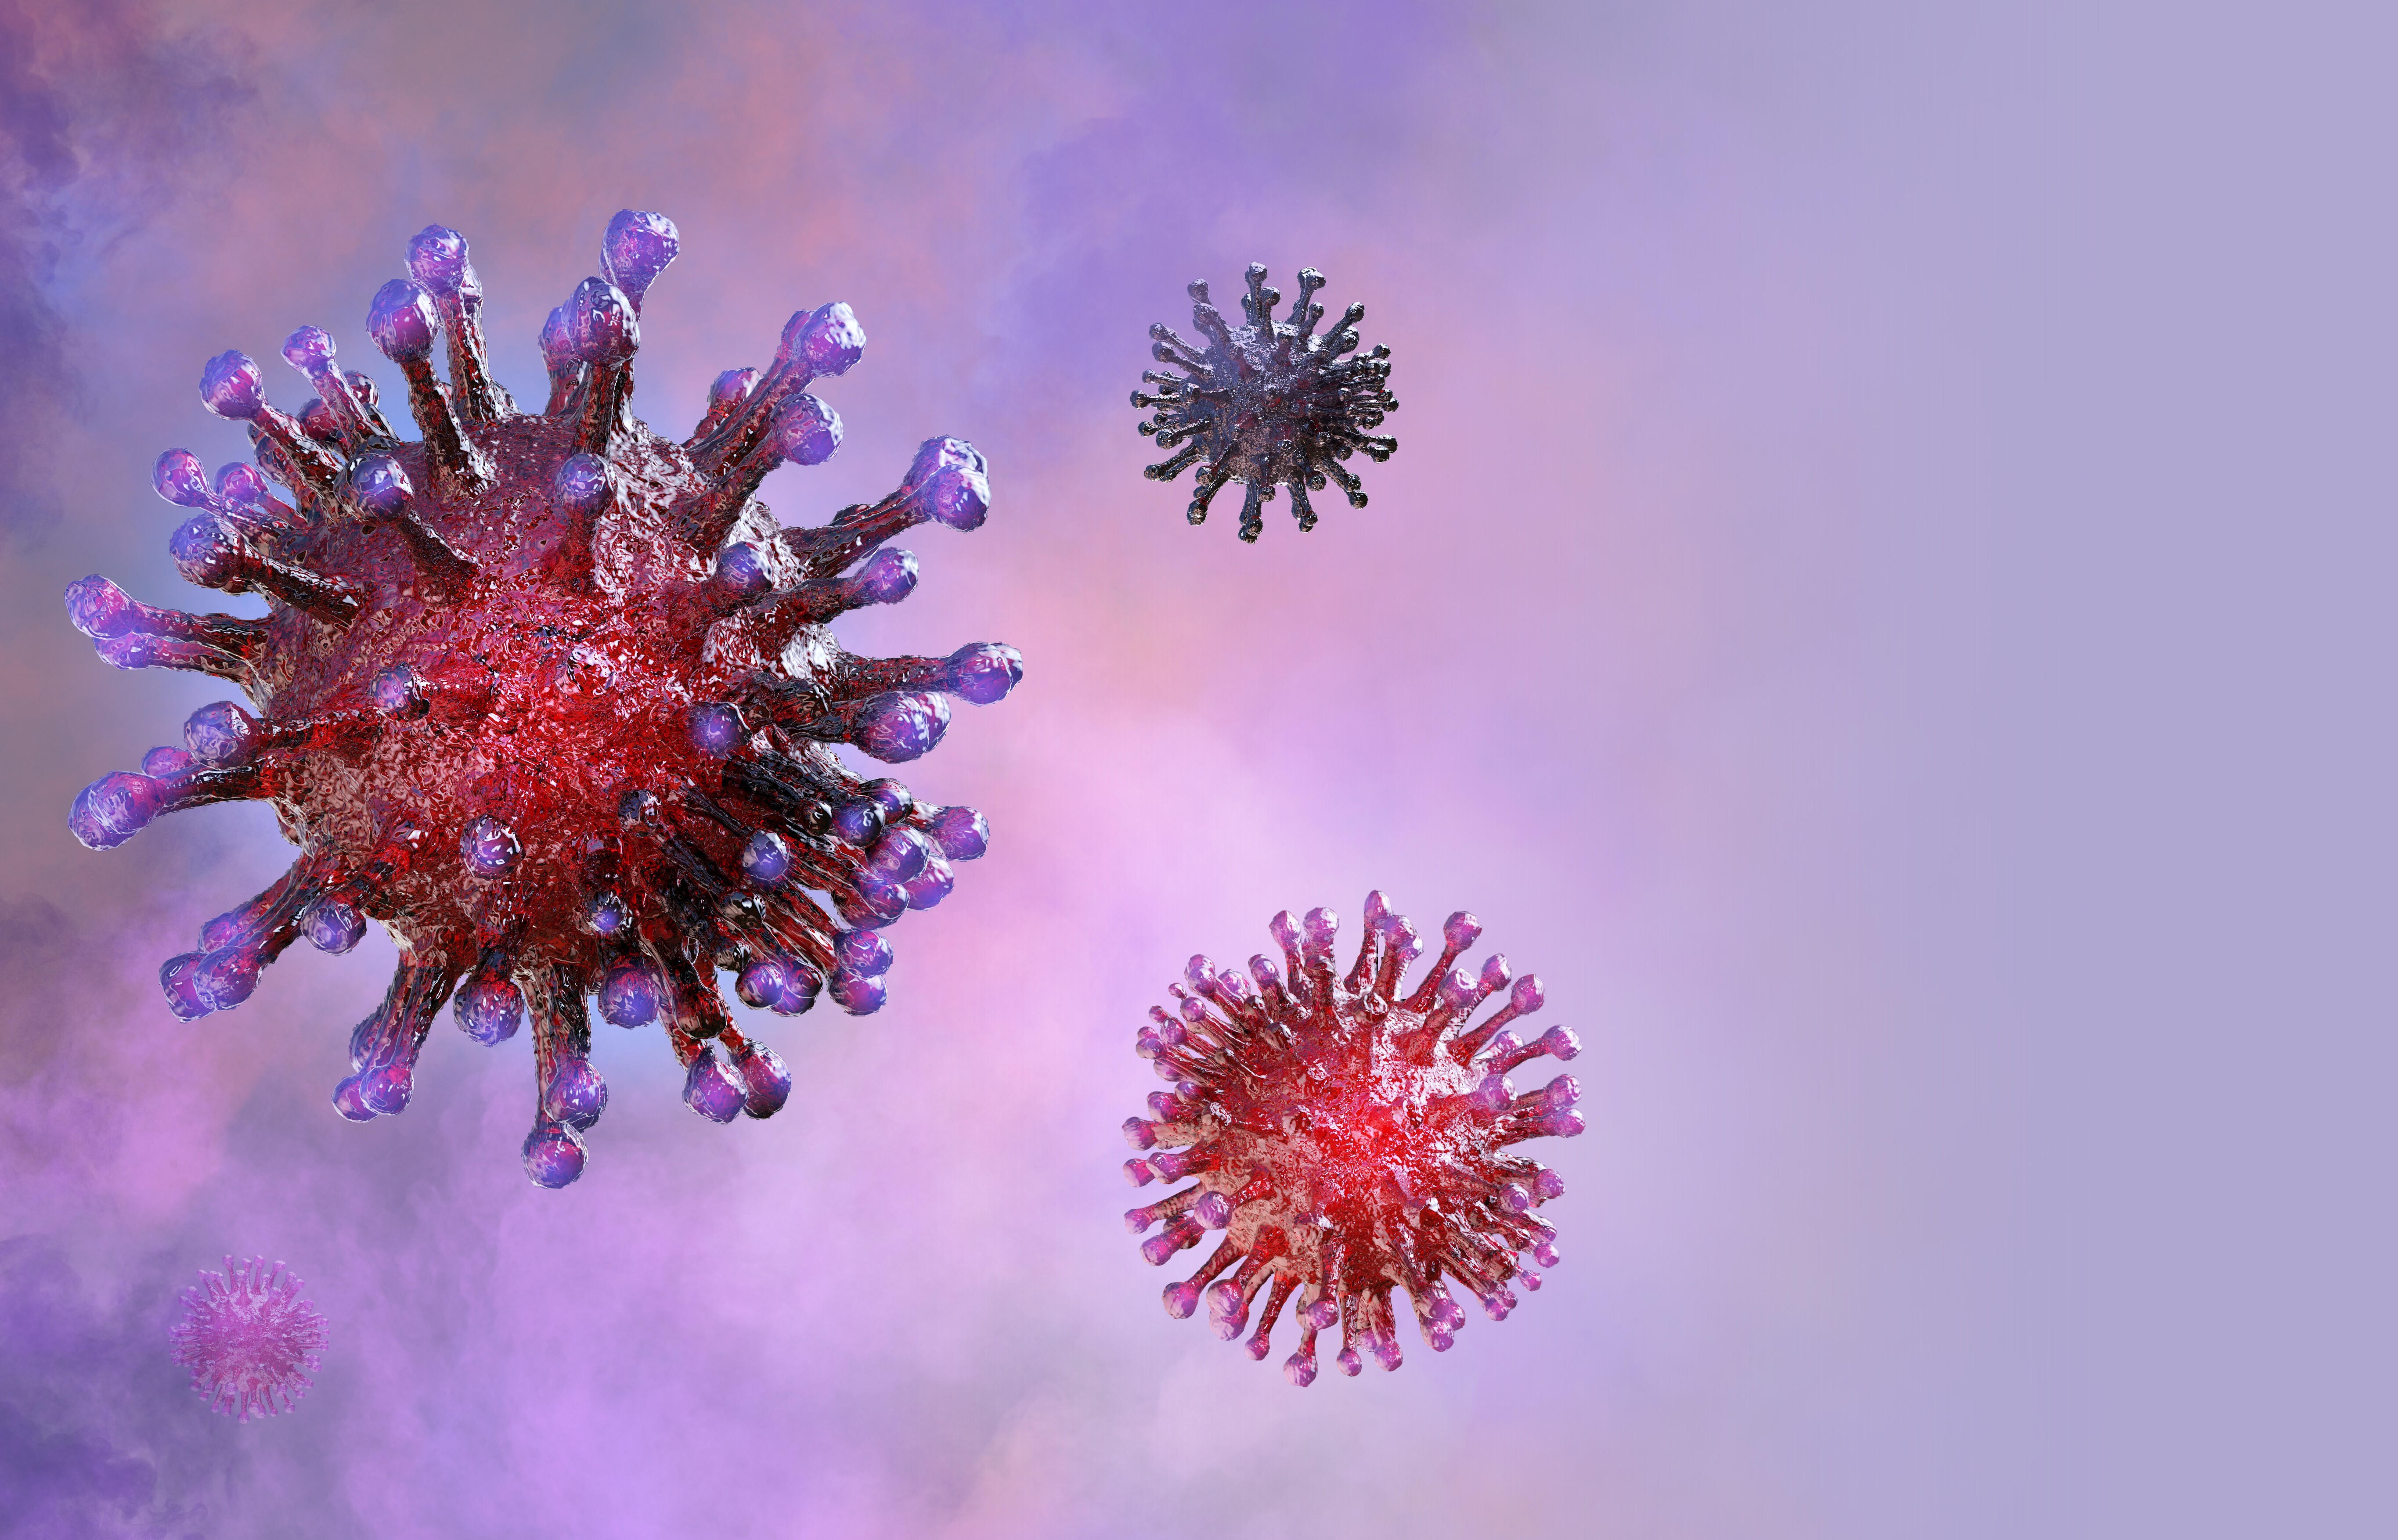 Further investigation is needed into the possibility that the coronavirus leaked from a laboratory, a group of researchers says. Photo: Shutterstock